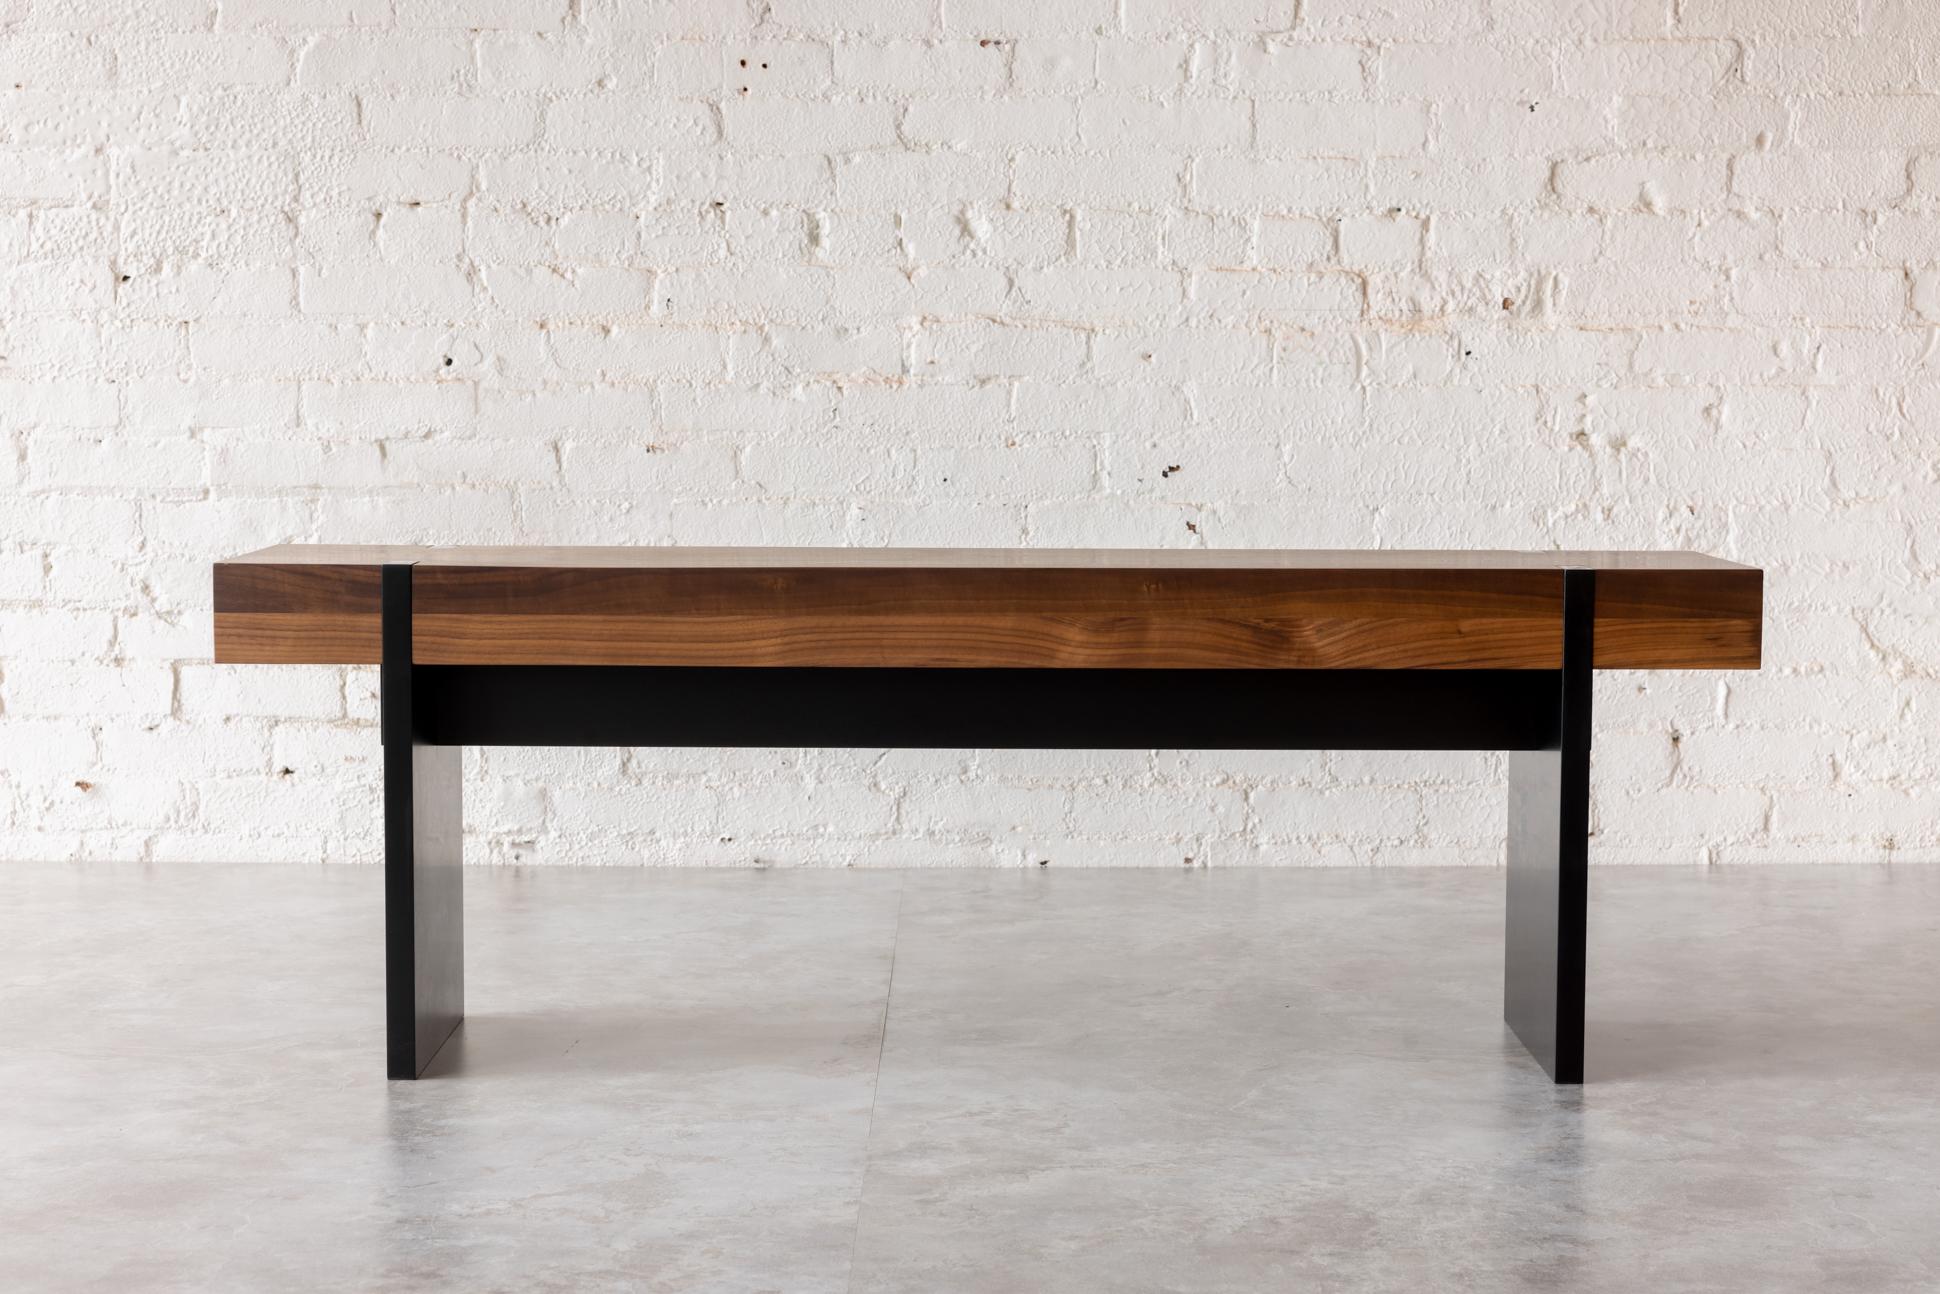 The dramatic Tillikum Black by Autonomous Furniture features our Black Walnut solid wood top set on striking matte black frame and legs. The minimalist design by Kirk Van Ludwig combines these elements to create a modern handcrafted bench. A welcome